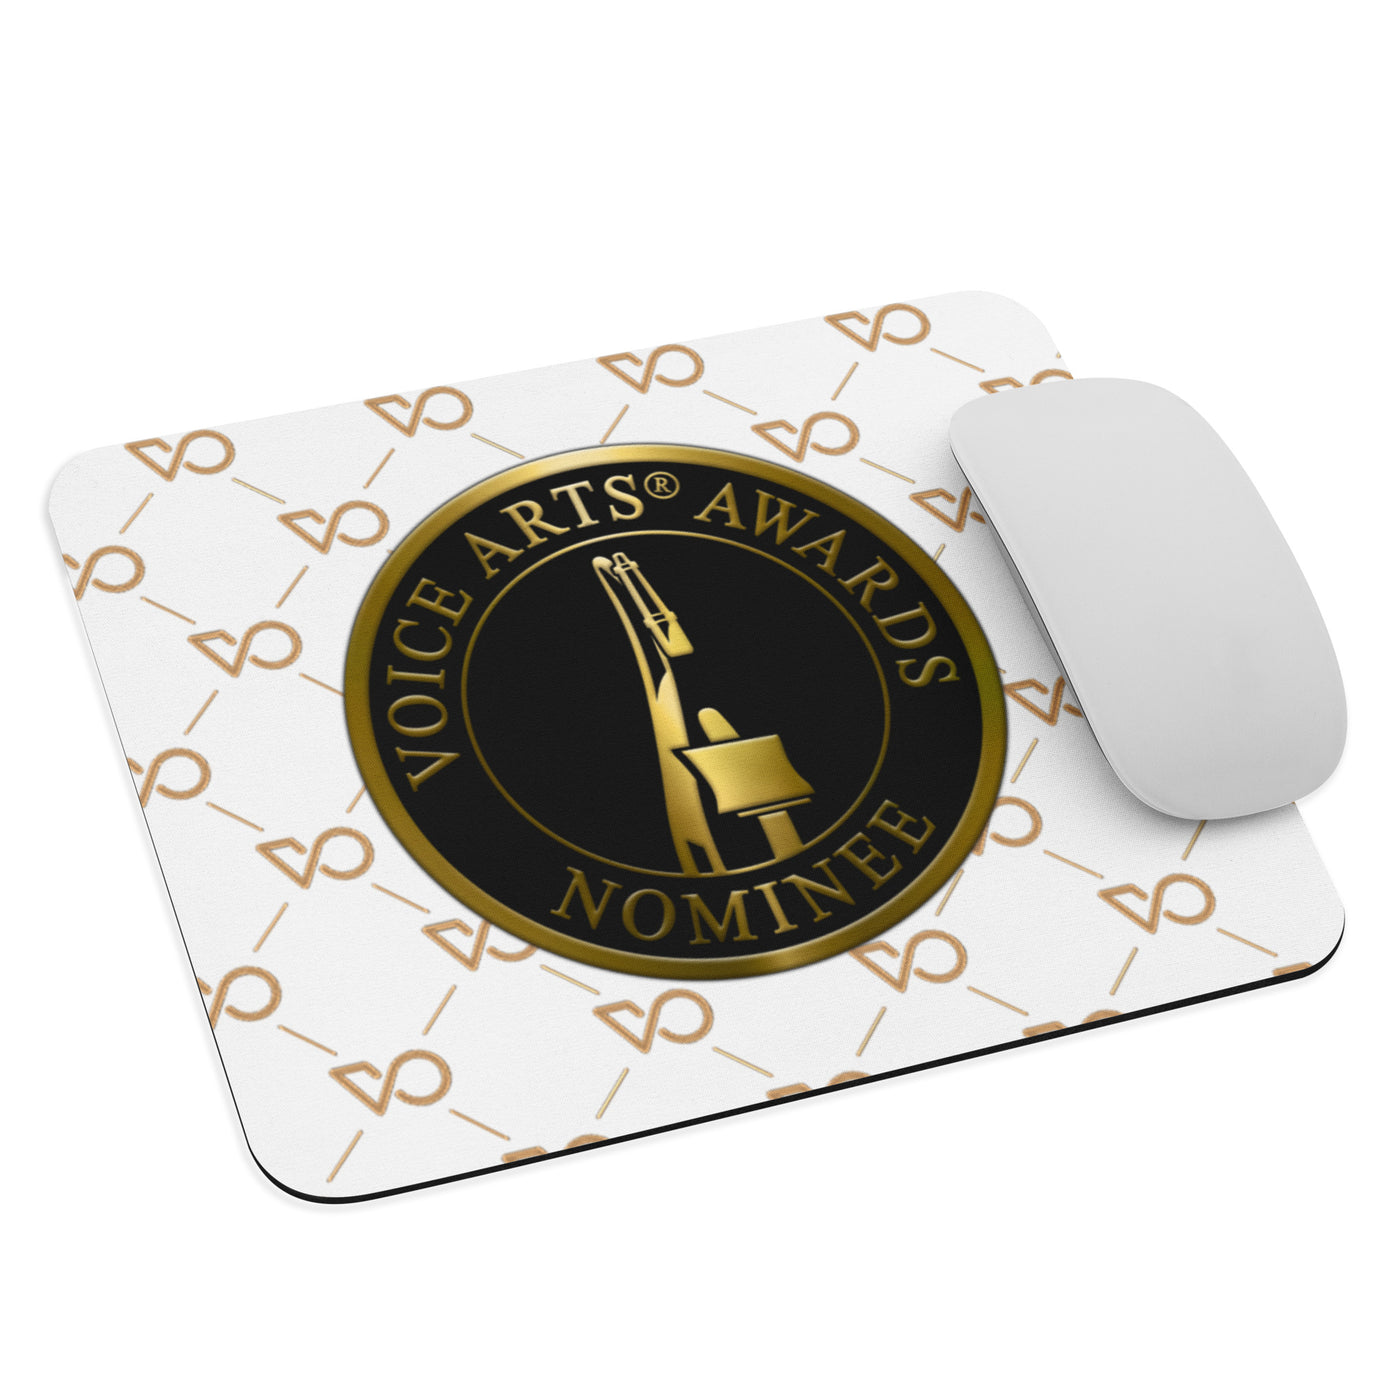 VAA NOMINEE Seal! Mouse pad white